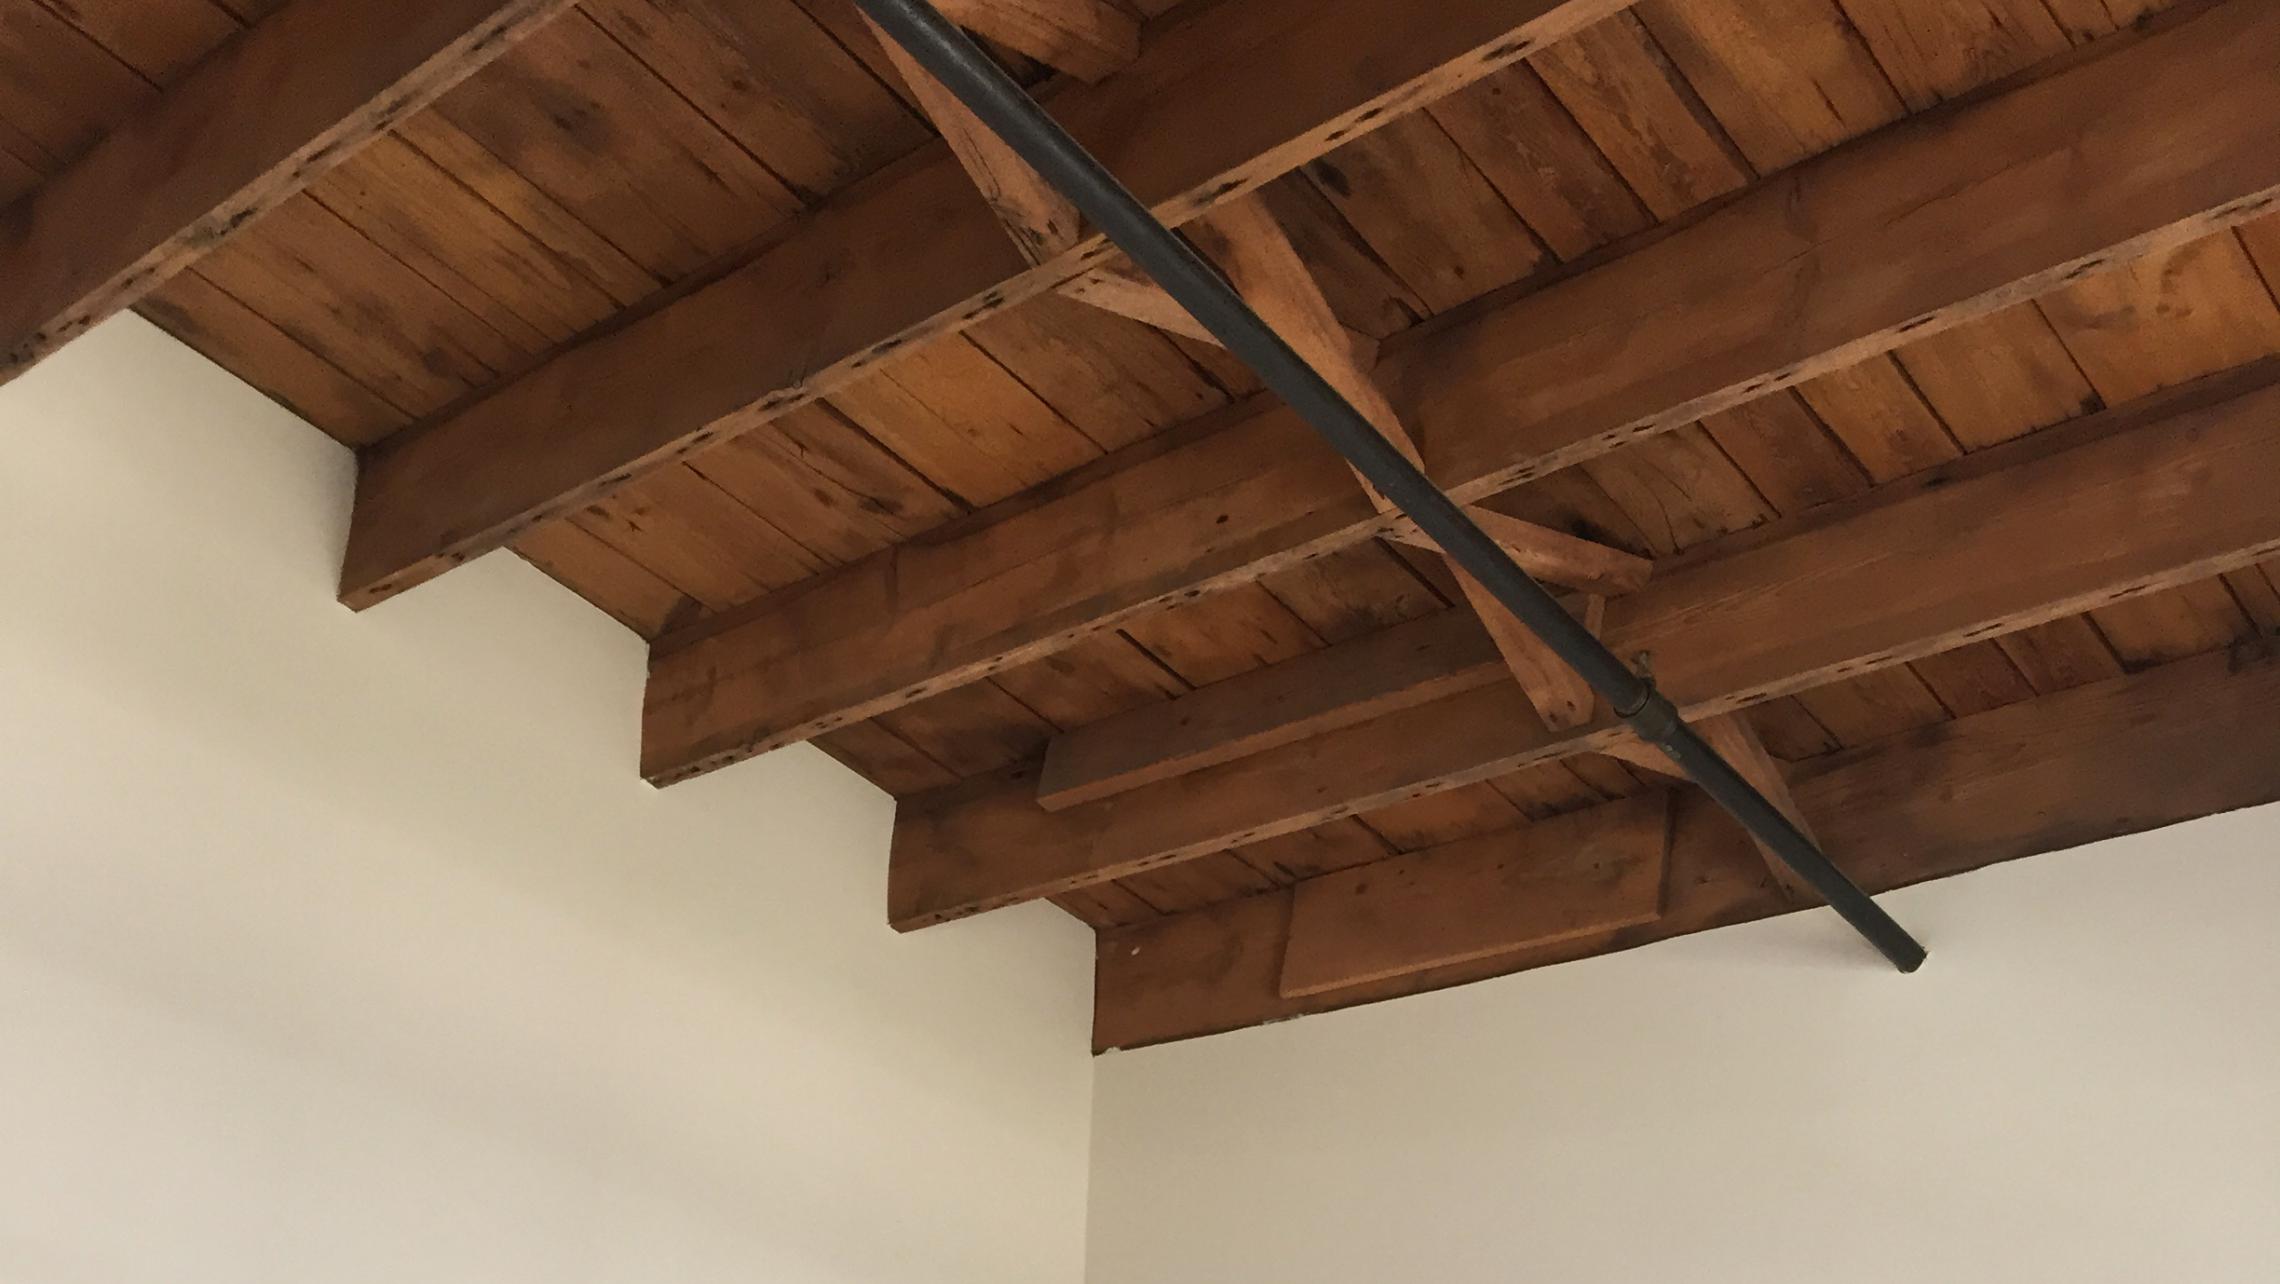 ULI Tobacco Lofts - E309 - Ceiling with Exposed Wood Beams